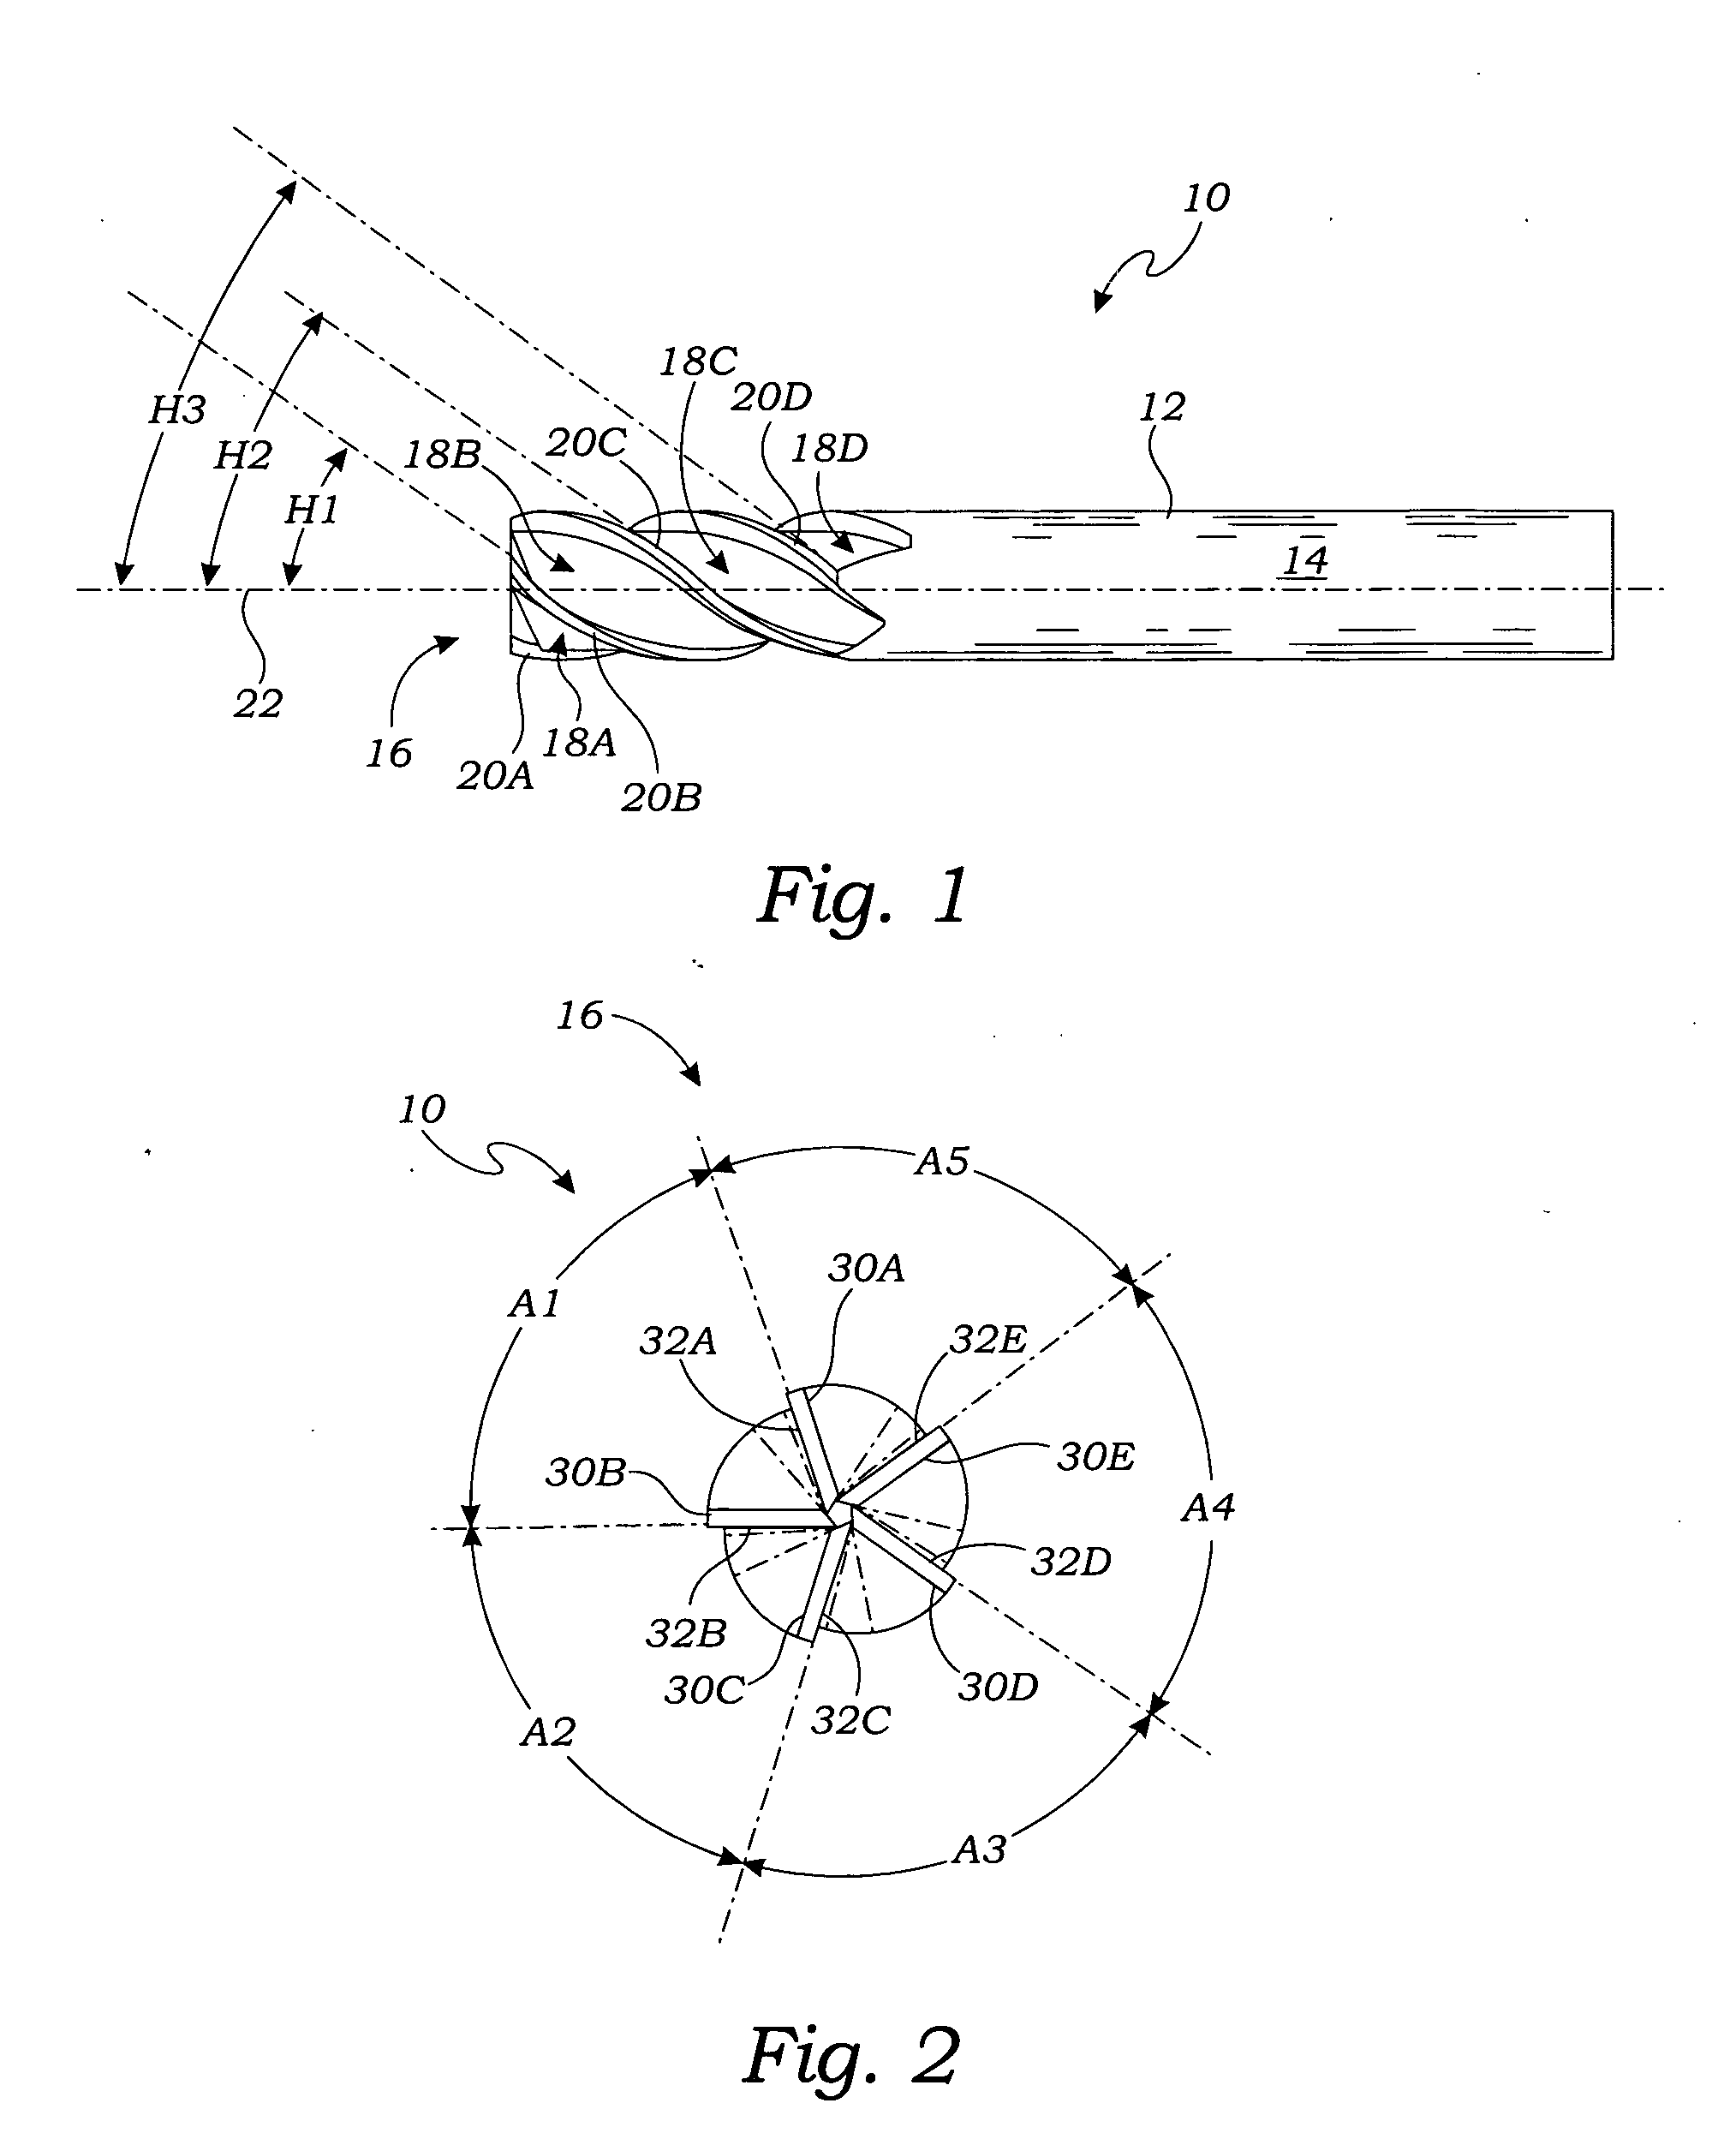 Rotary cutting tool having multiple helical cutting edges with differing helix angles